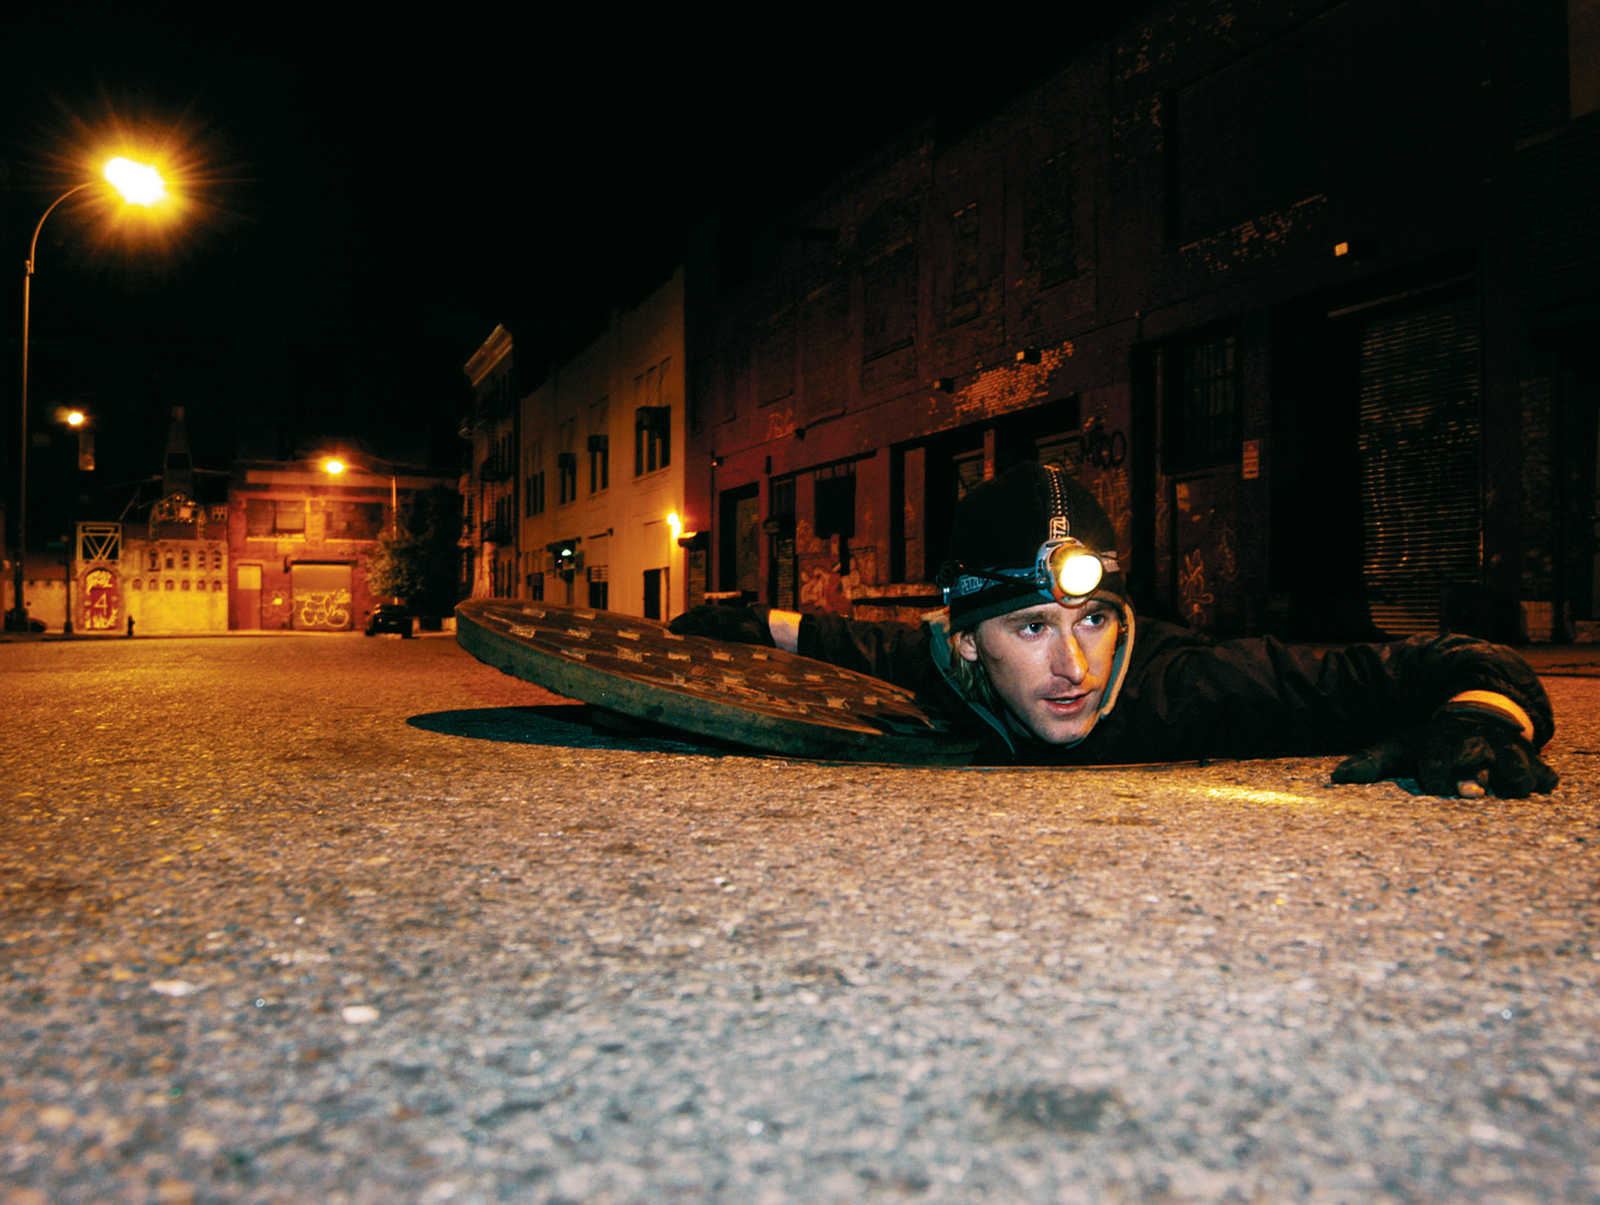 Photographer Steve Duncan crawling out of a man hole